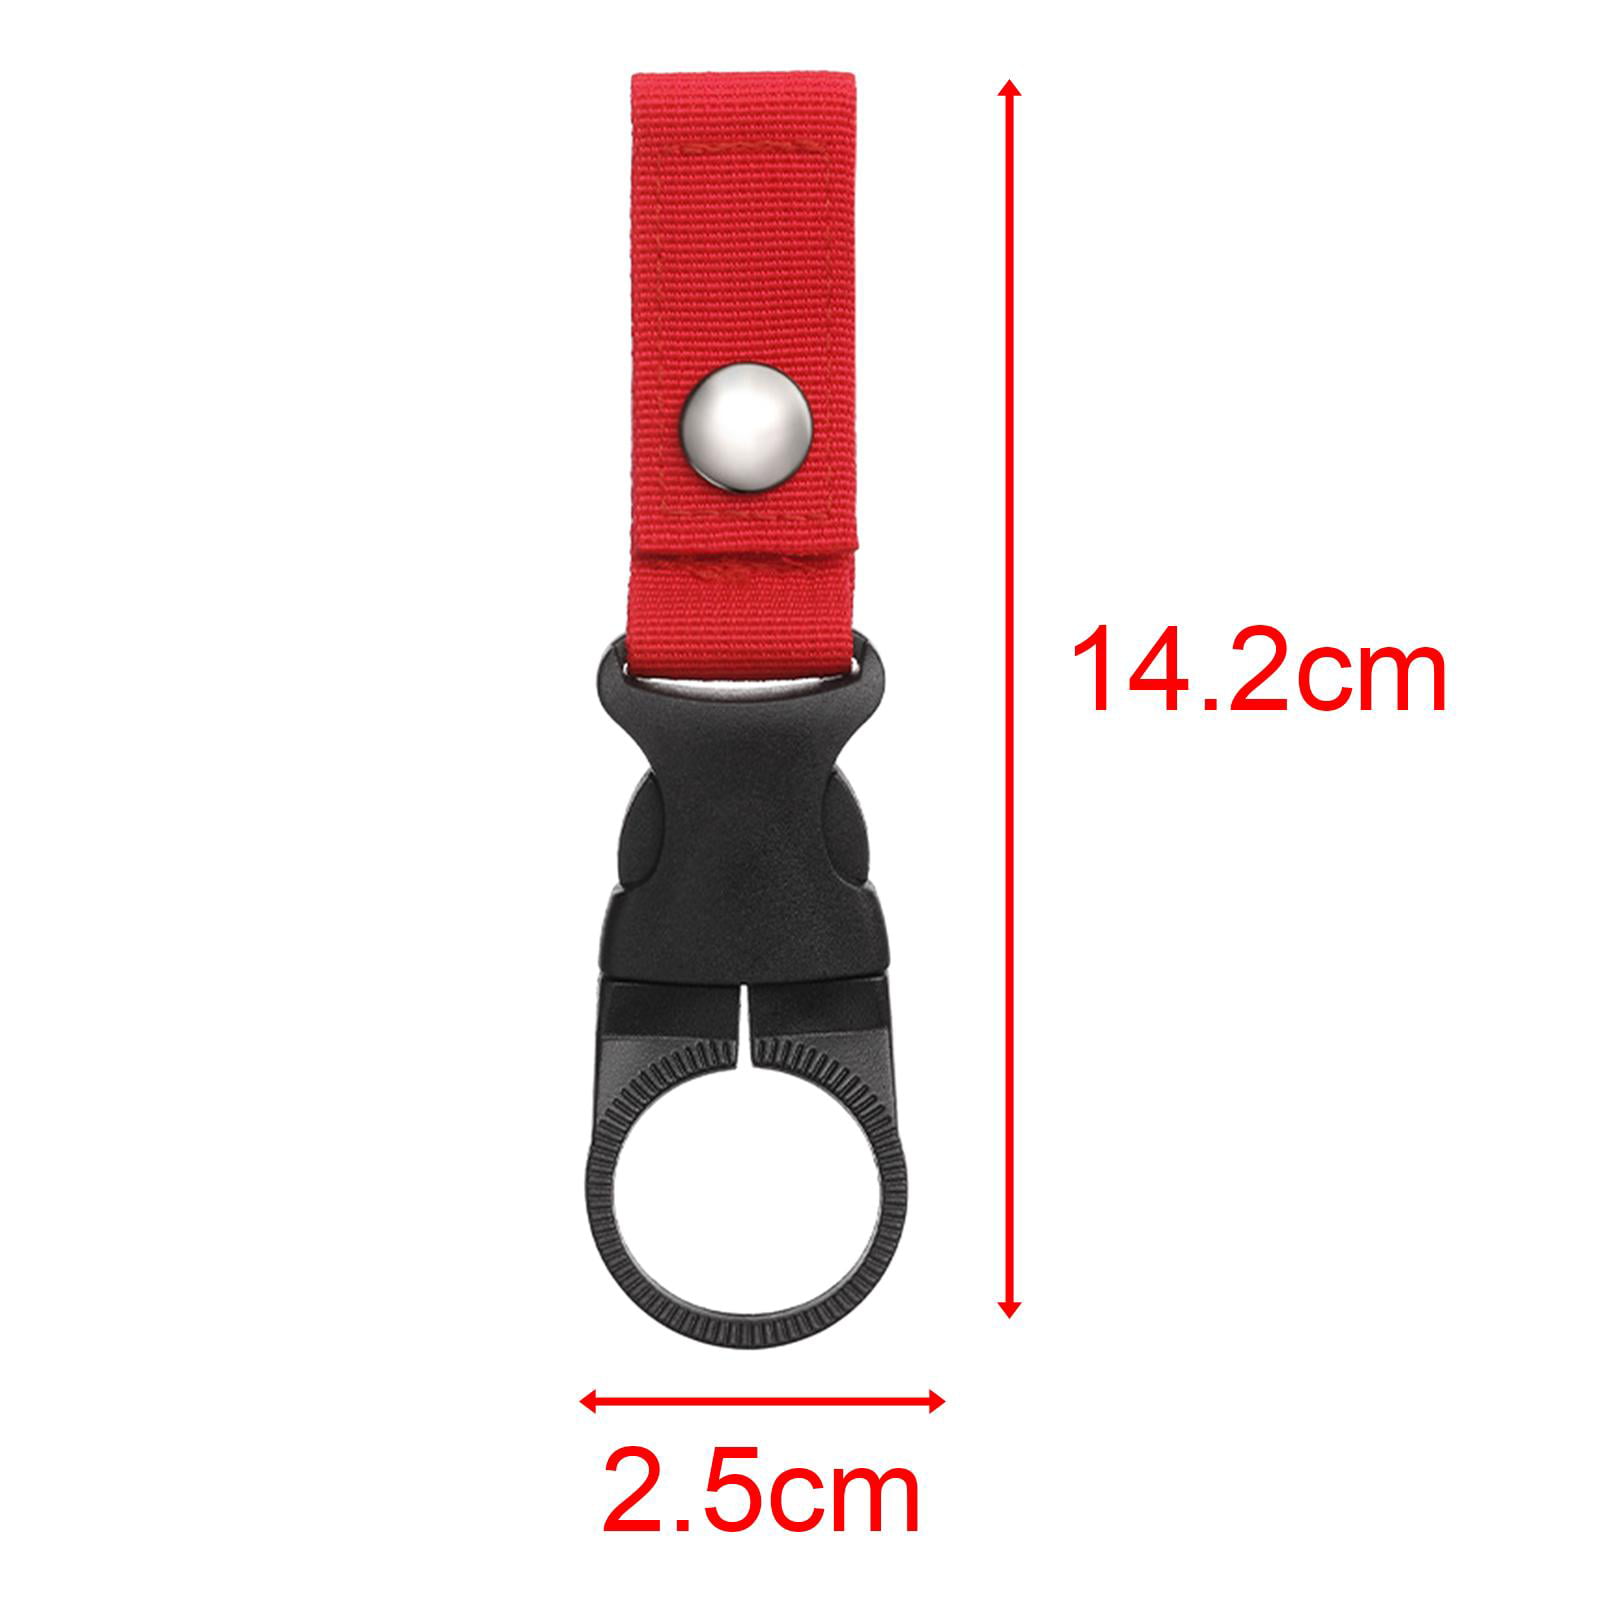 Joie Silicone Ring Carabiner Clip Disposable Water Bottle Drink Holder -  Fits Most Standard Sized Bottles - Red - Bed Bath & Beyond - 30585276